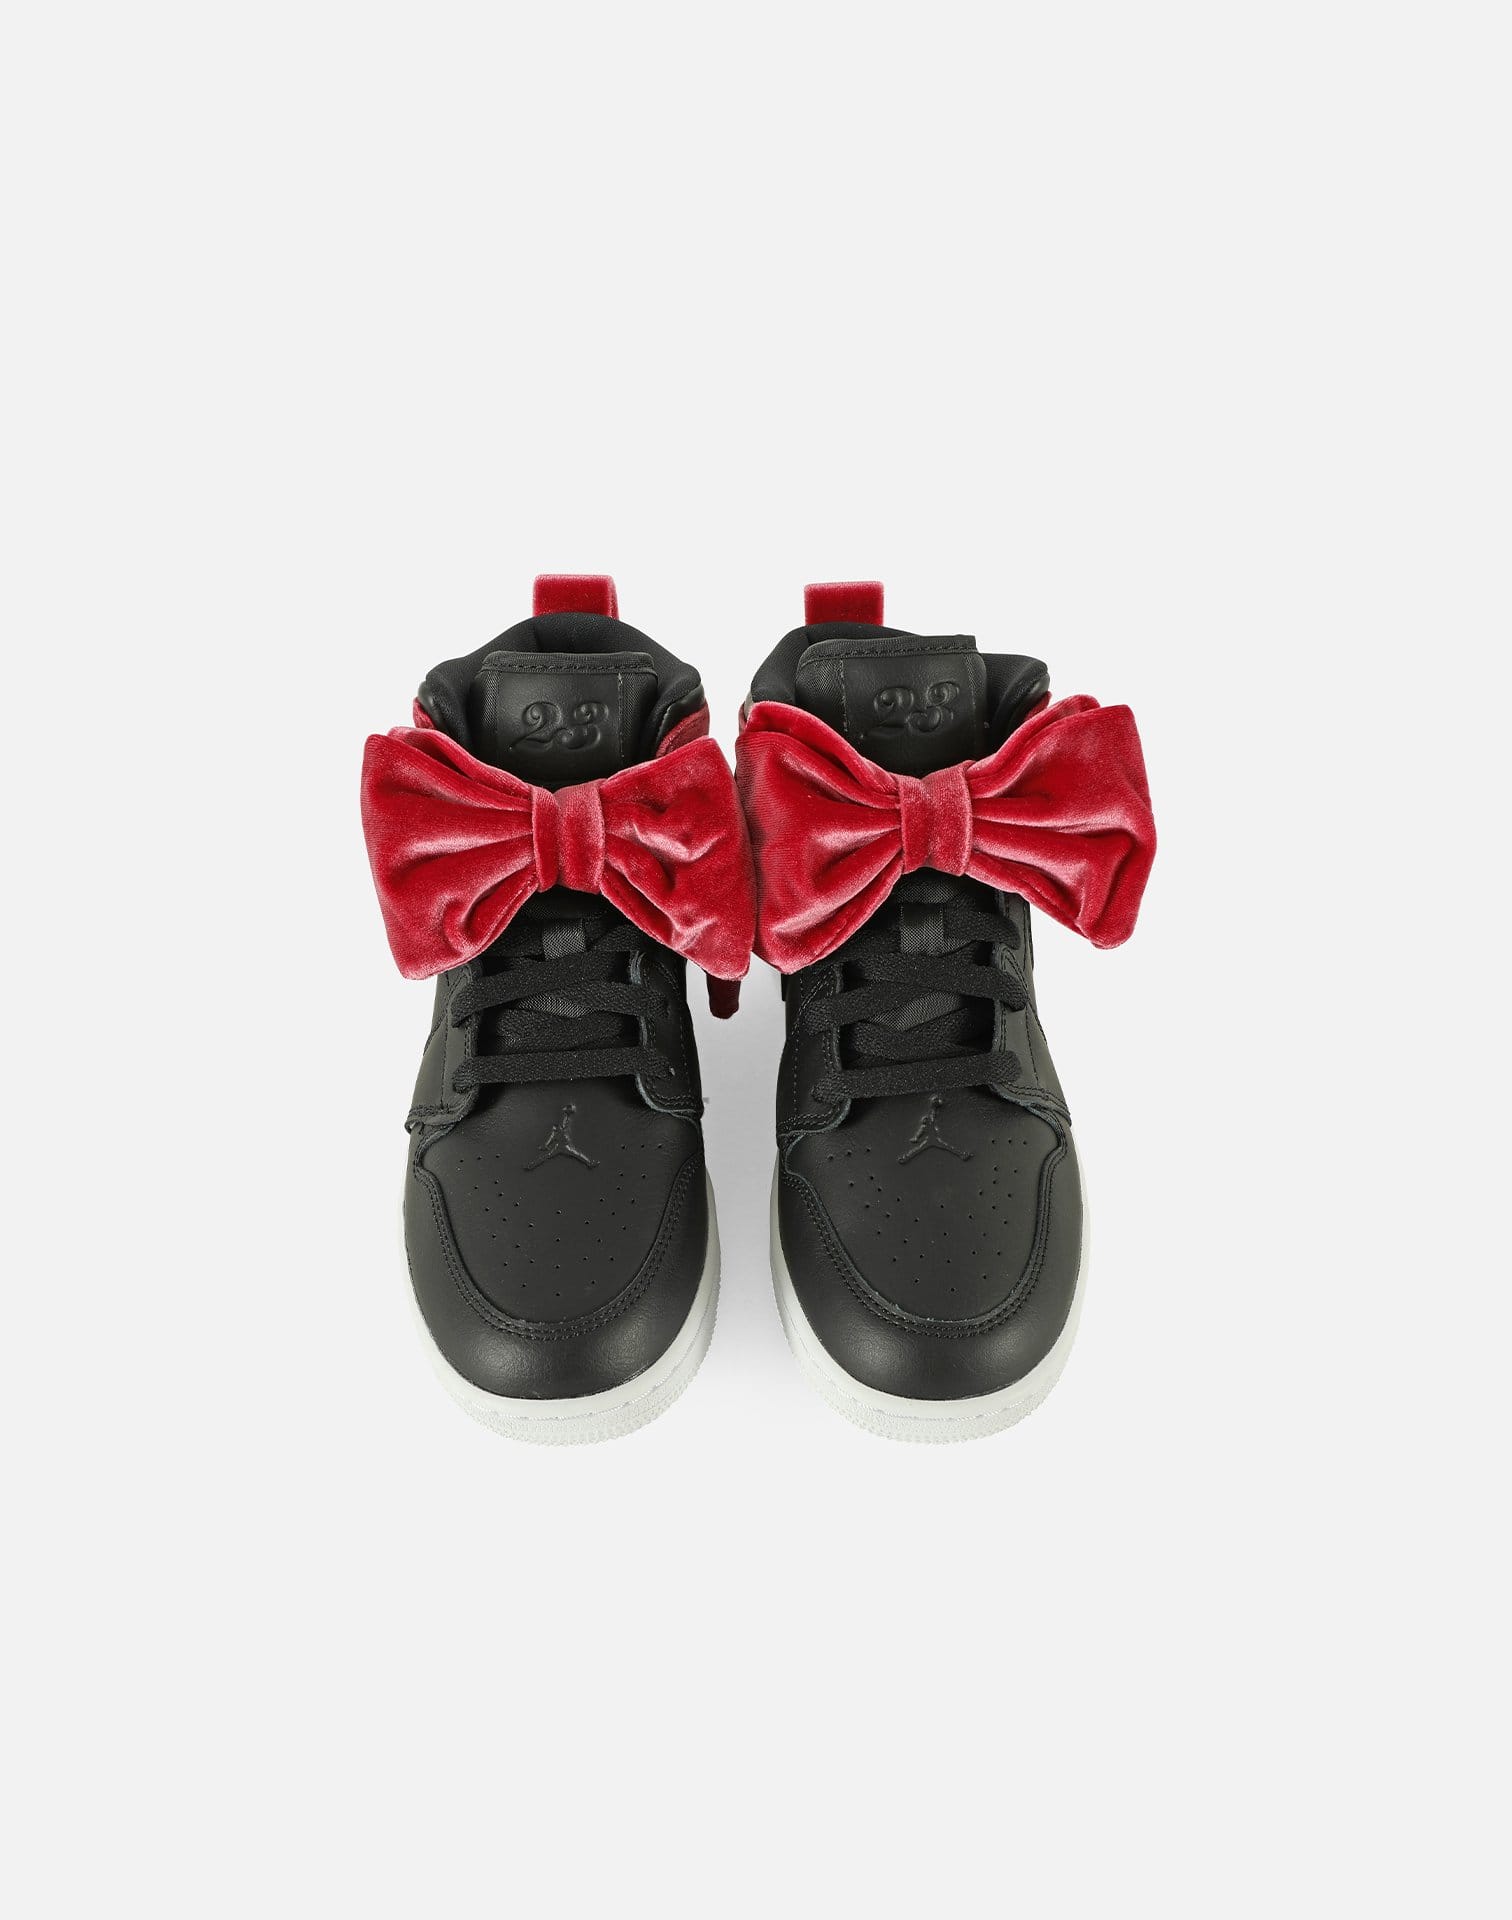 jordans with a bow